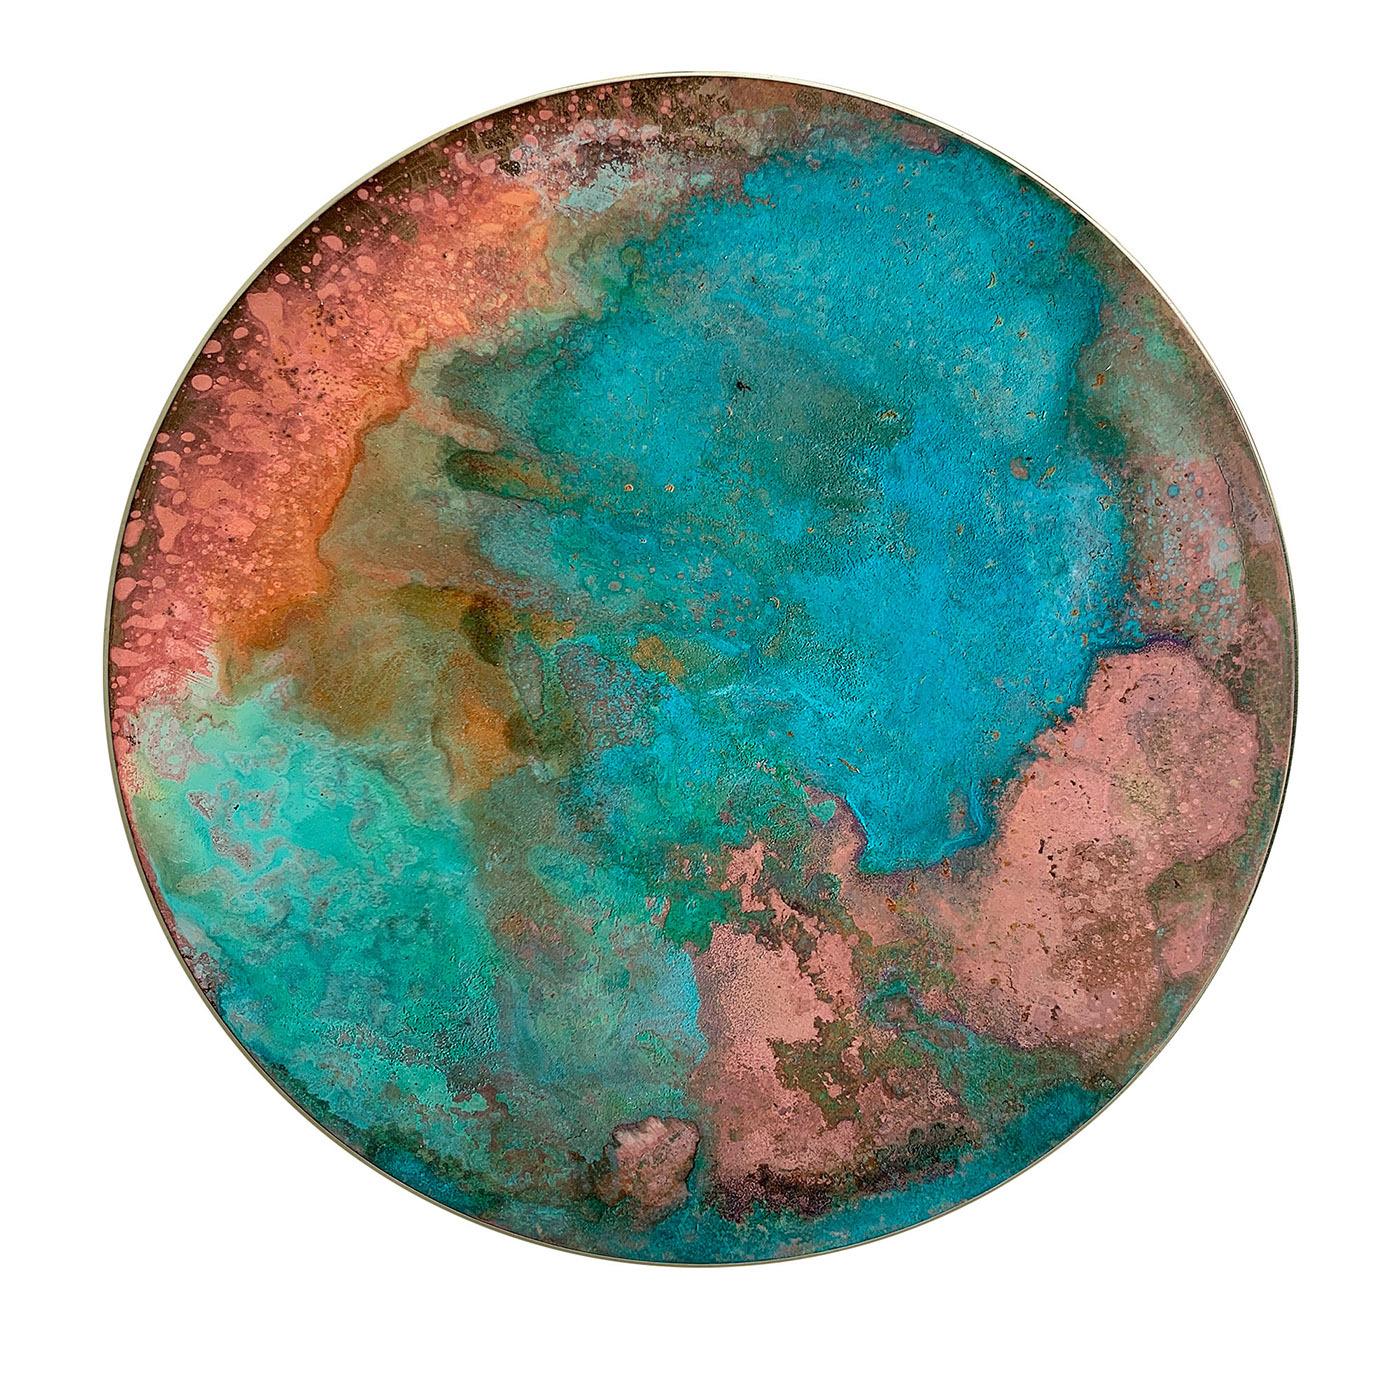 Inspired by romantic sunrises, this singular decorative disk takes advantage of the intriguing traceries and shades oxidizing liquids create. Each piece is carefully handcrafted, flaunting vibrant decoration where pink, turquoise, and mustard shades